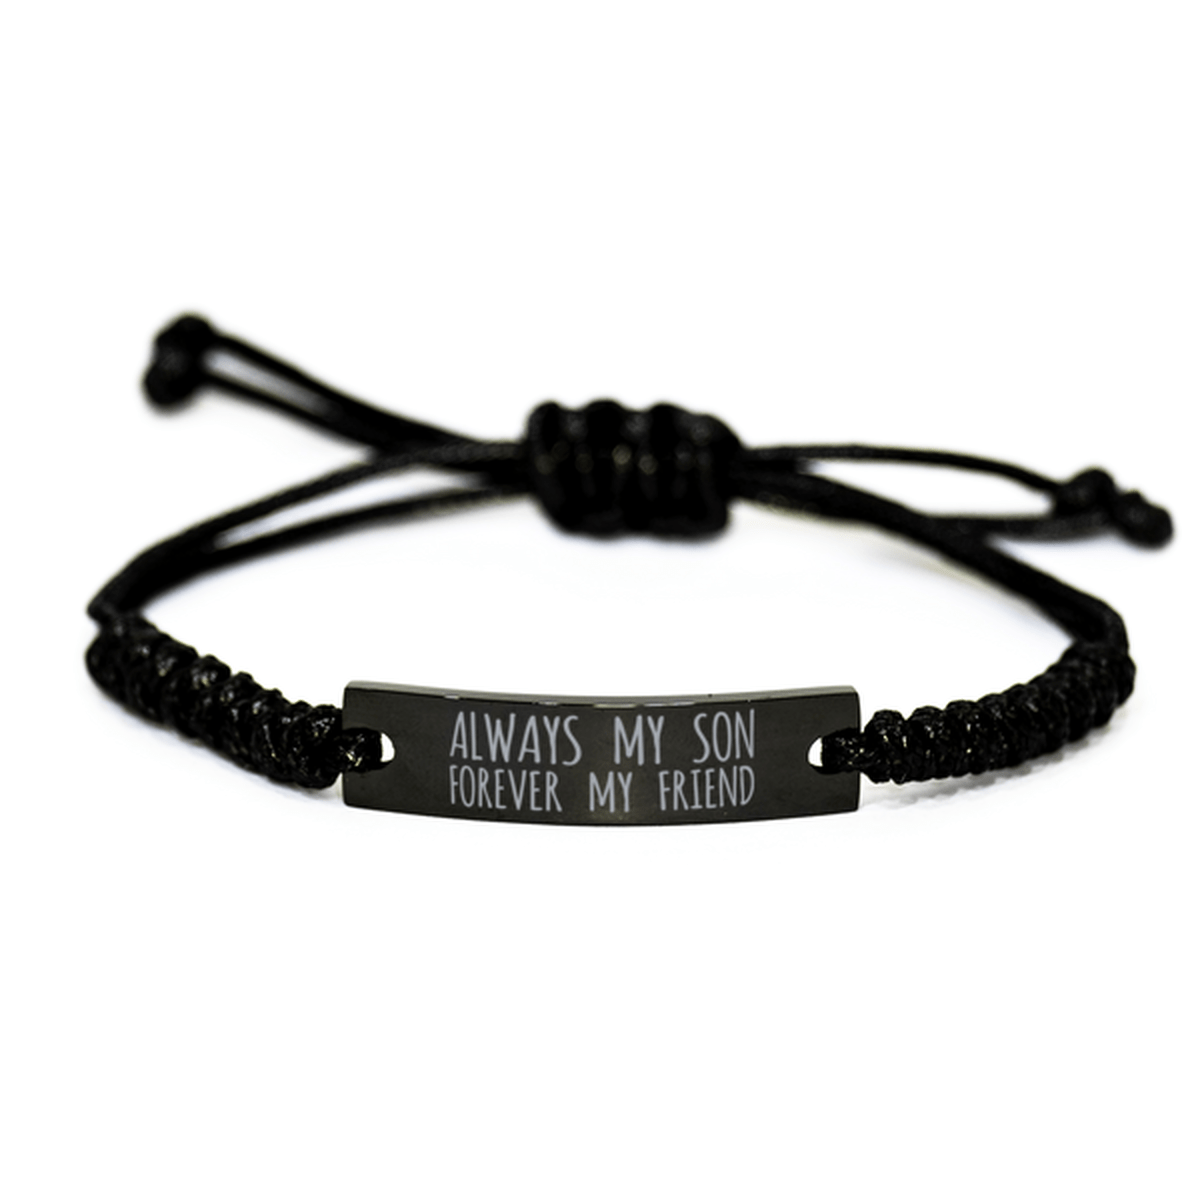 Inspirational Son Black Rope Bracelet, Always My Son Forever My Friend, Best Birthday Gifts For Family